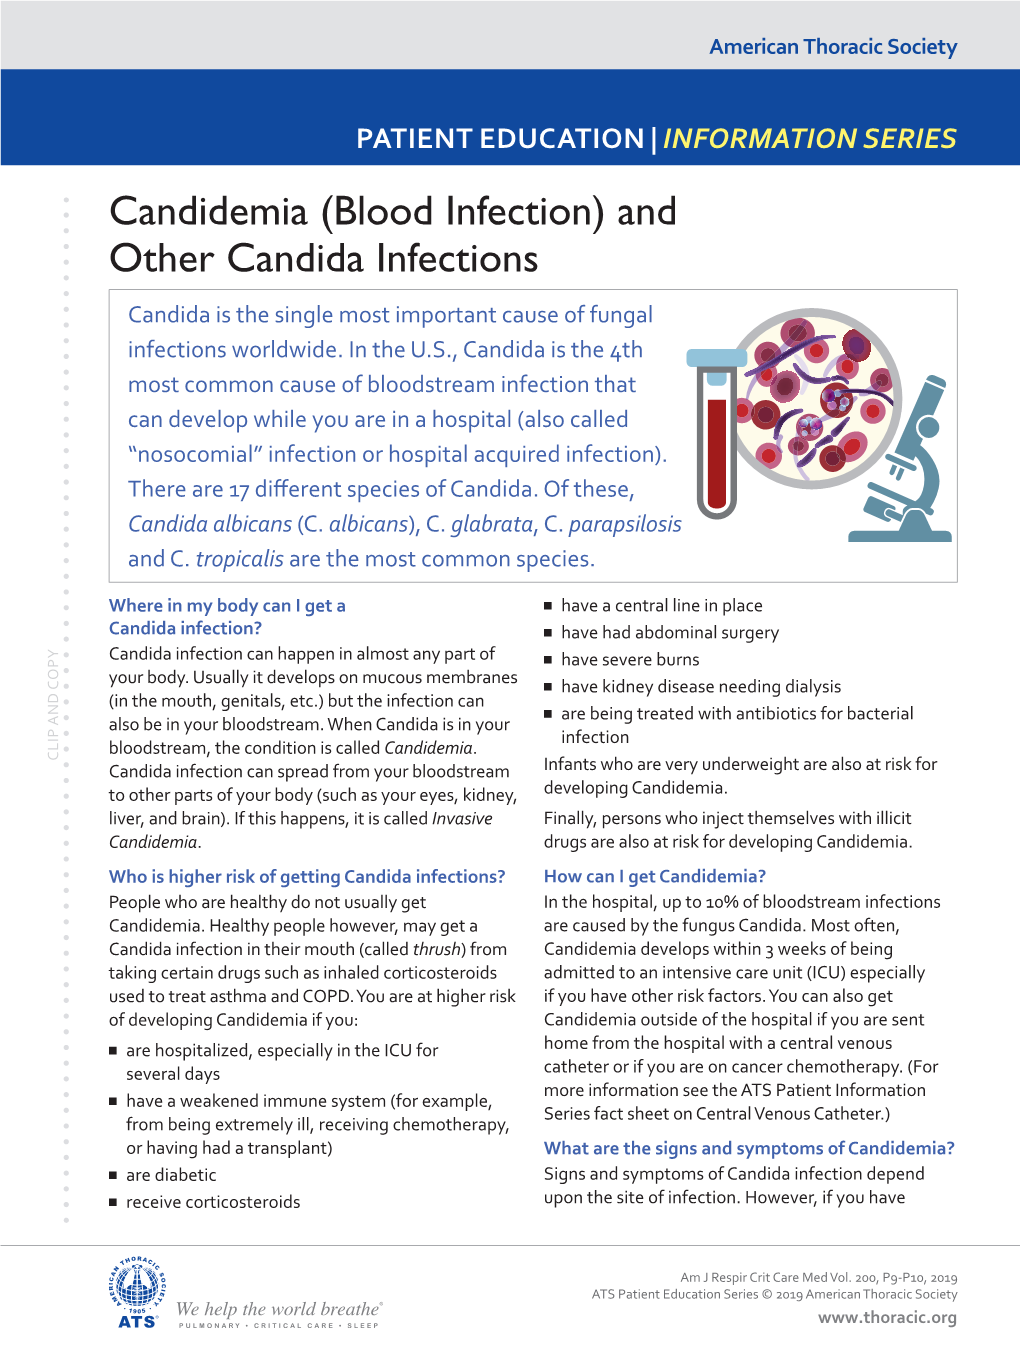 Candidemia (Blood Infection) and Other Candida Infections Candida Is the Single Most Important Cause of Fungal Infections Worldwide